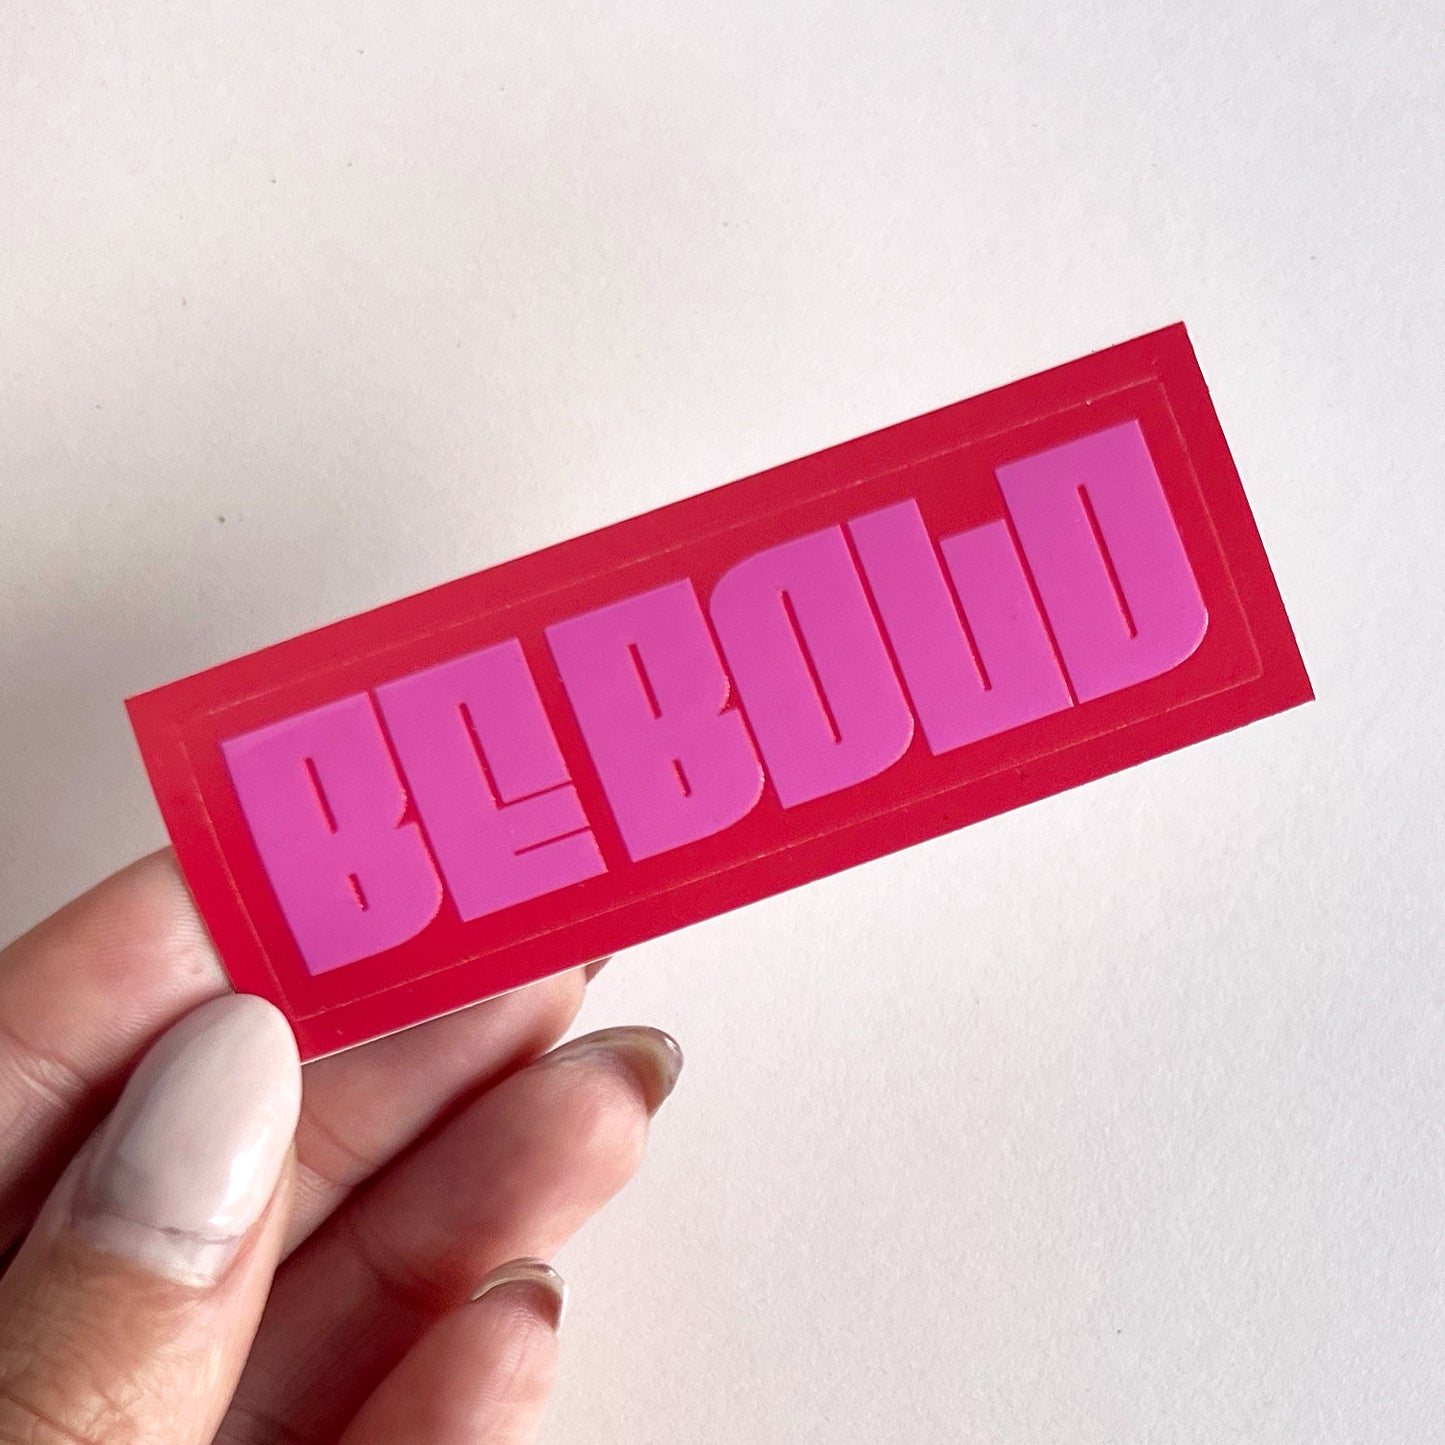 red and pink be bold sticker, held in hand